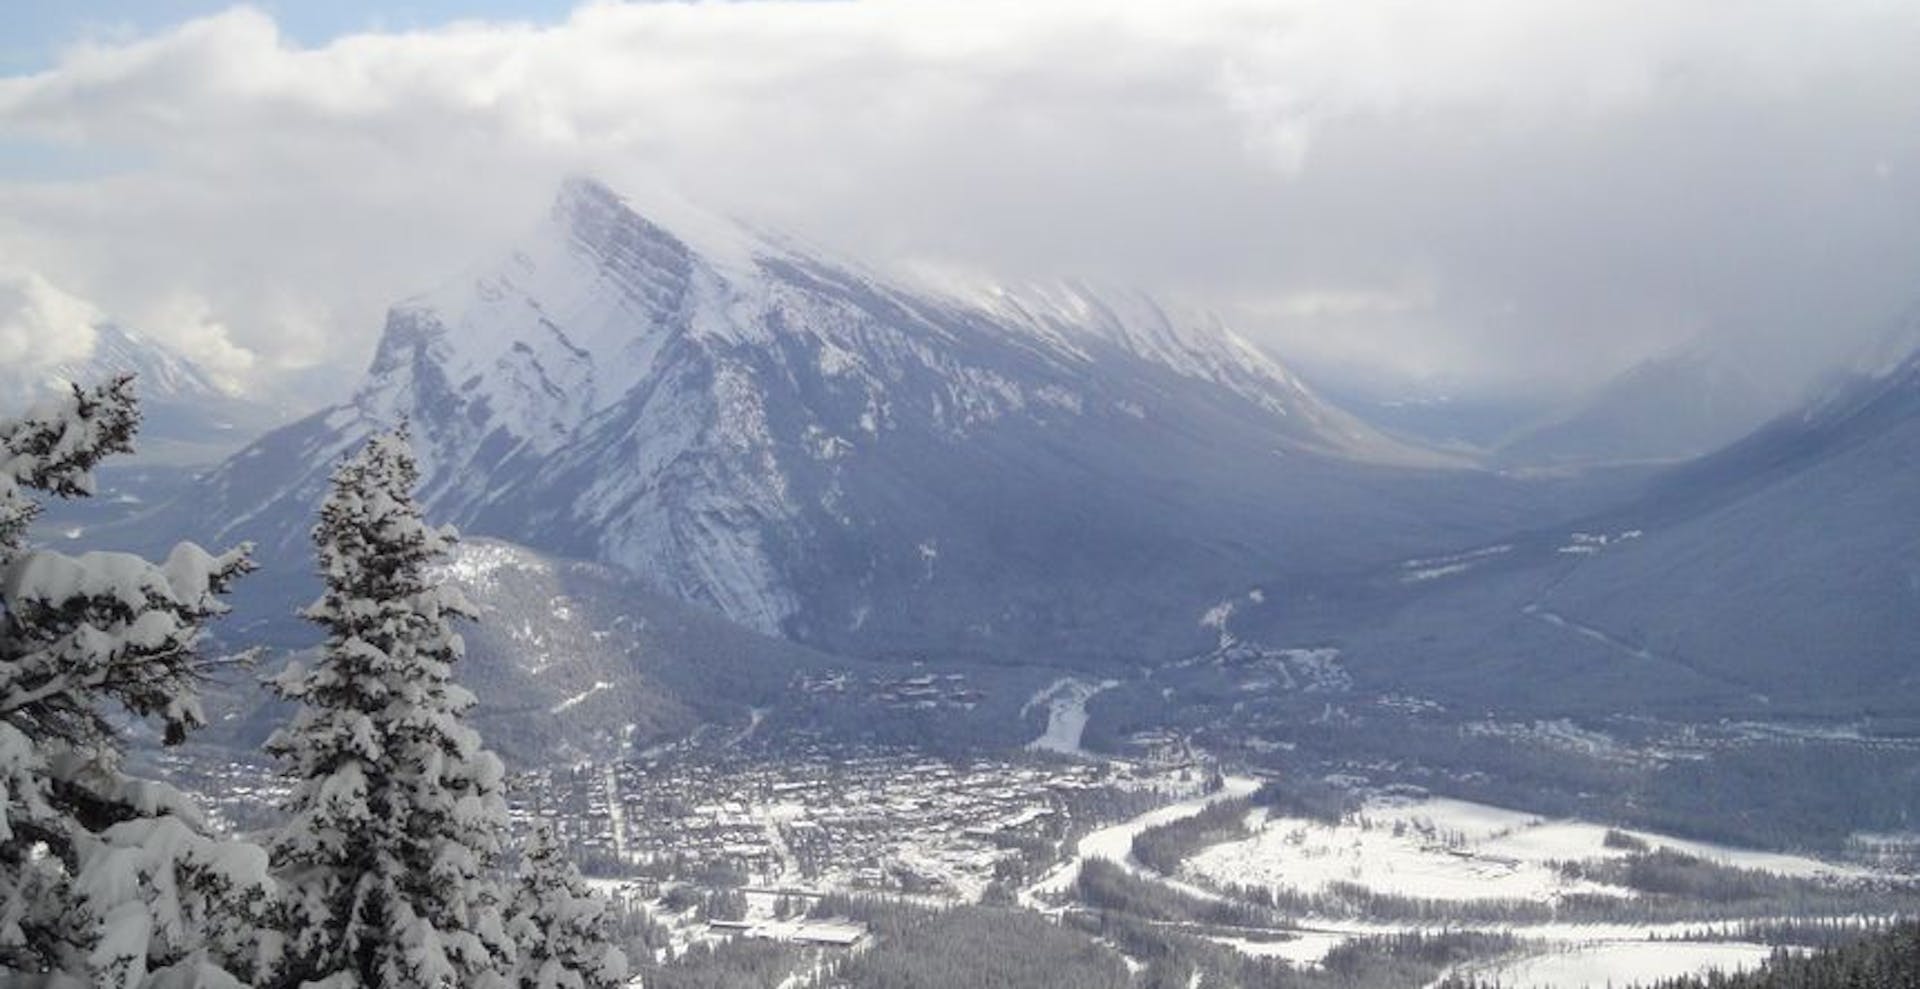 Mt Norquay overlooking the town of Banff